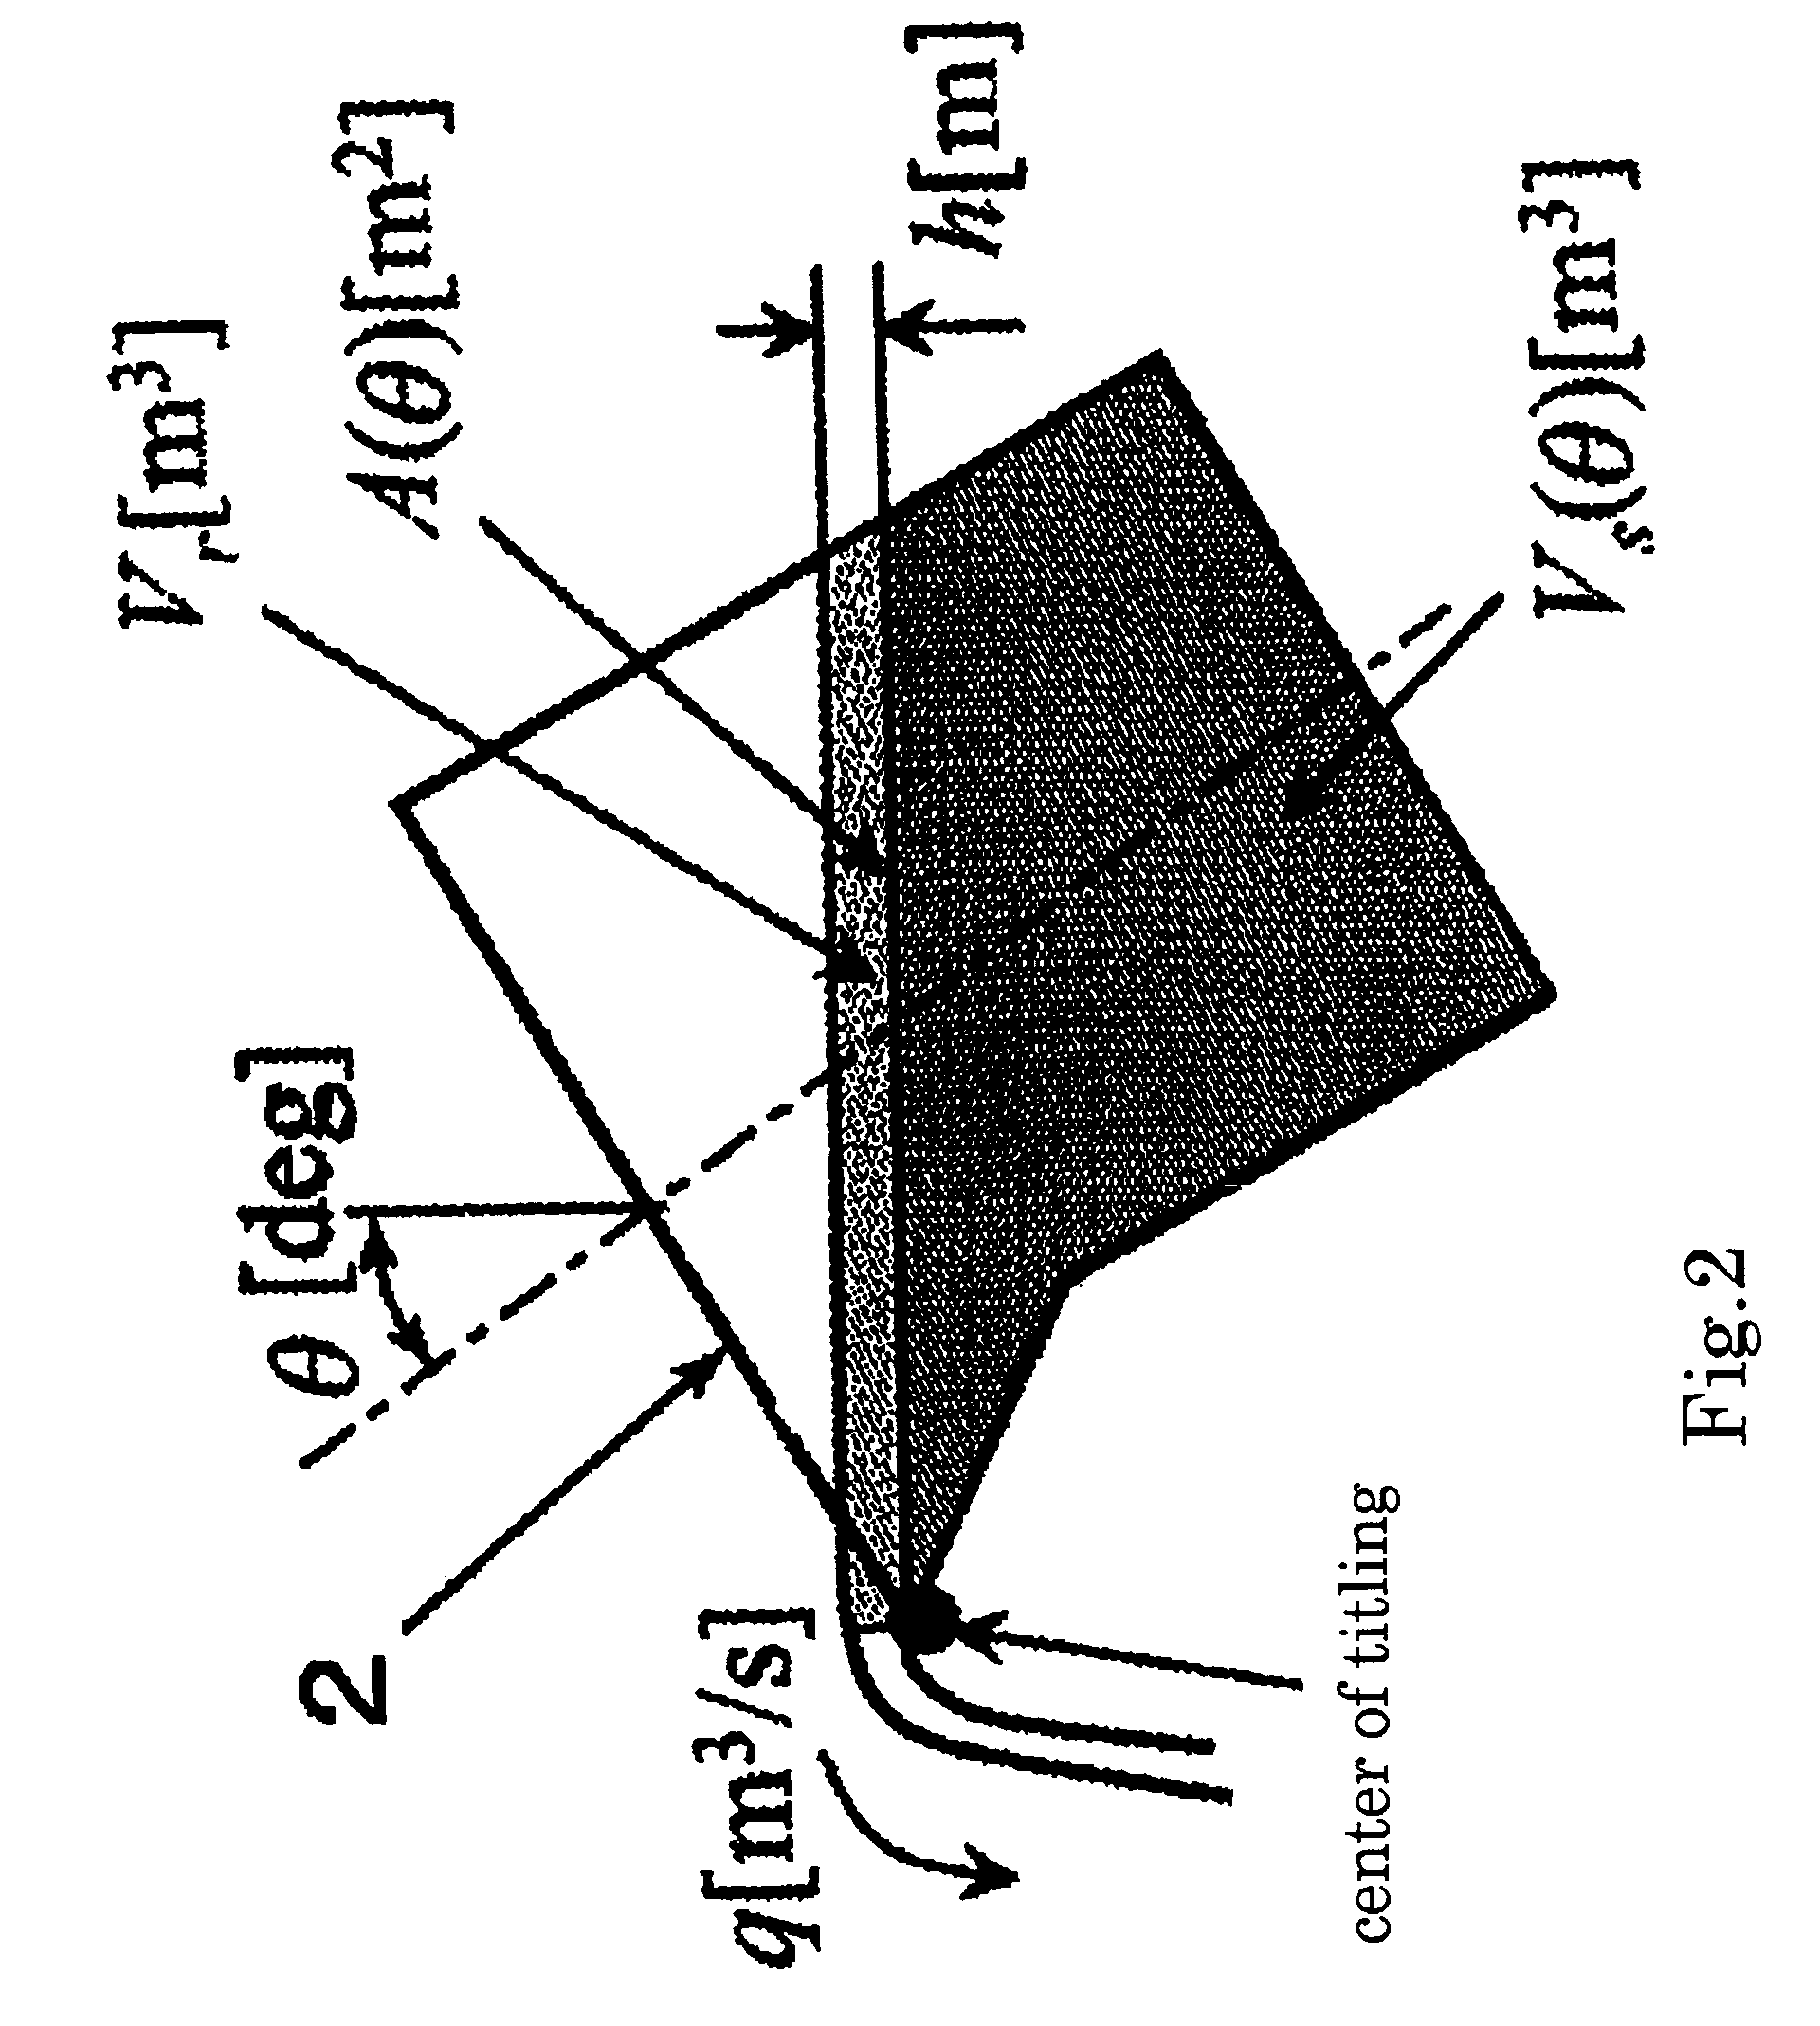 Tilting-type automatic pouring method and a medium that stores programs to control the tilting of a ladle